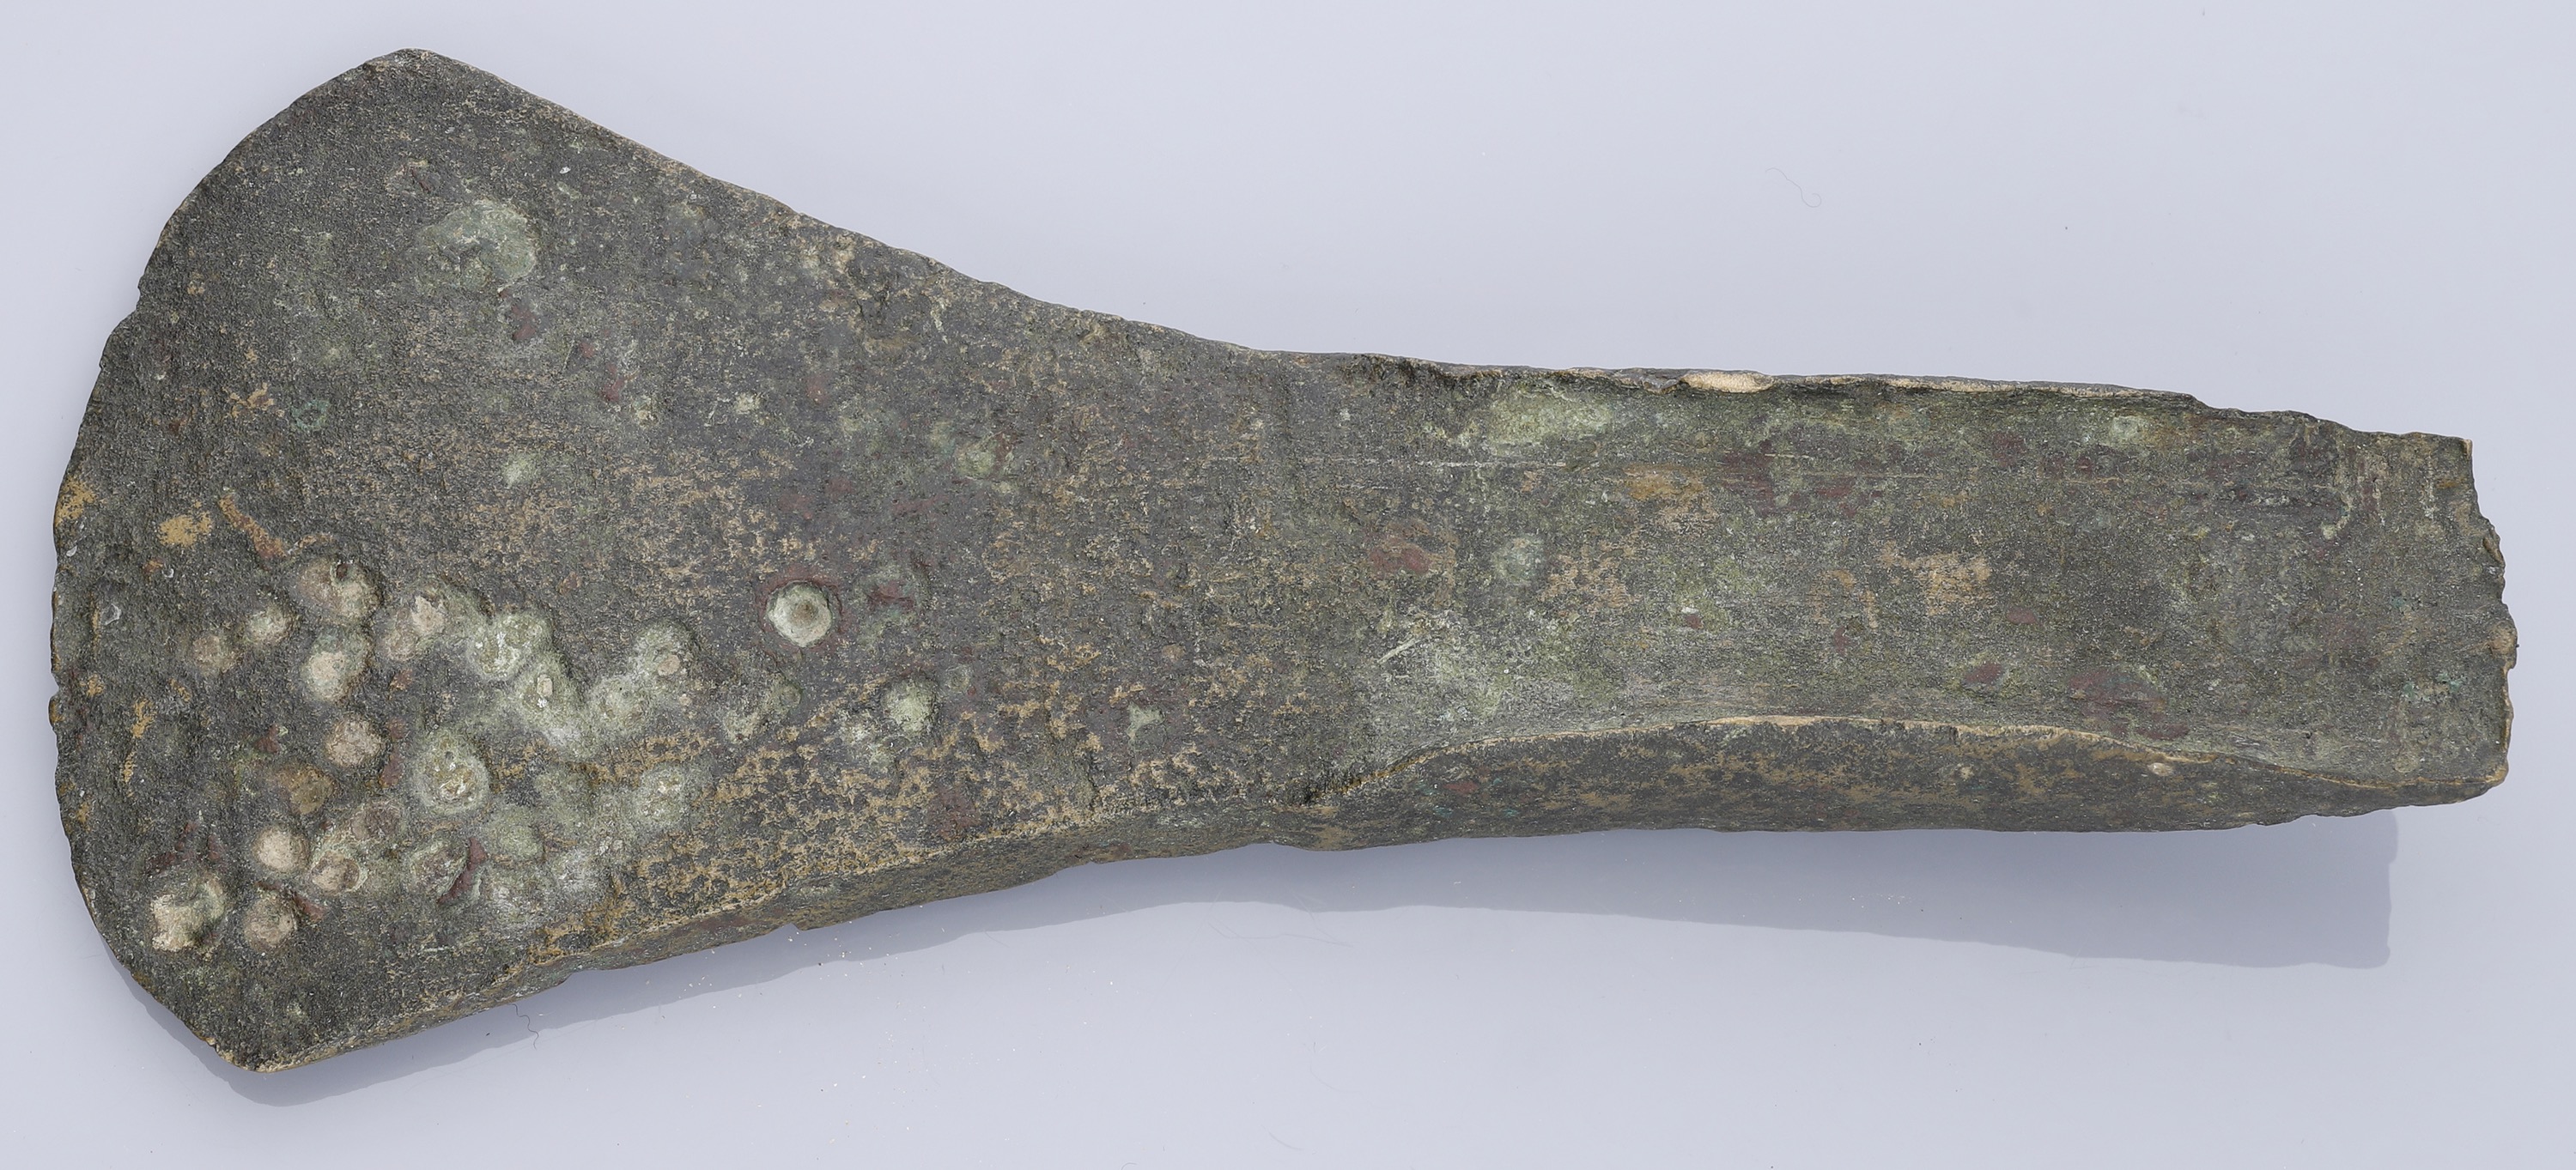 Bronze Age, a flat axe with side flanges, c. 1800-1500 BC, 15.5cm long by 7cm wide by 2cm de... - Image 2 of 2